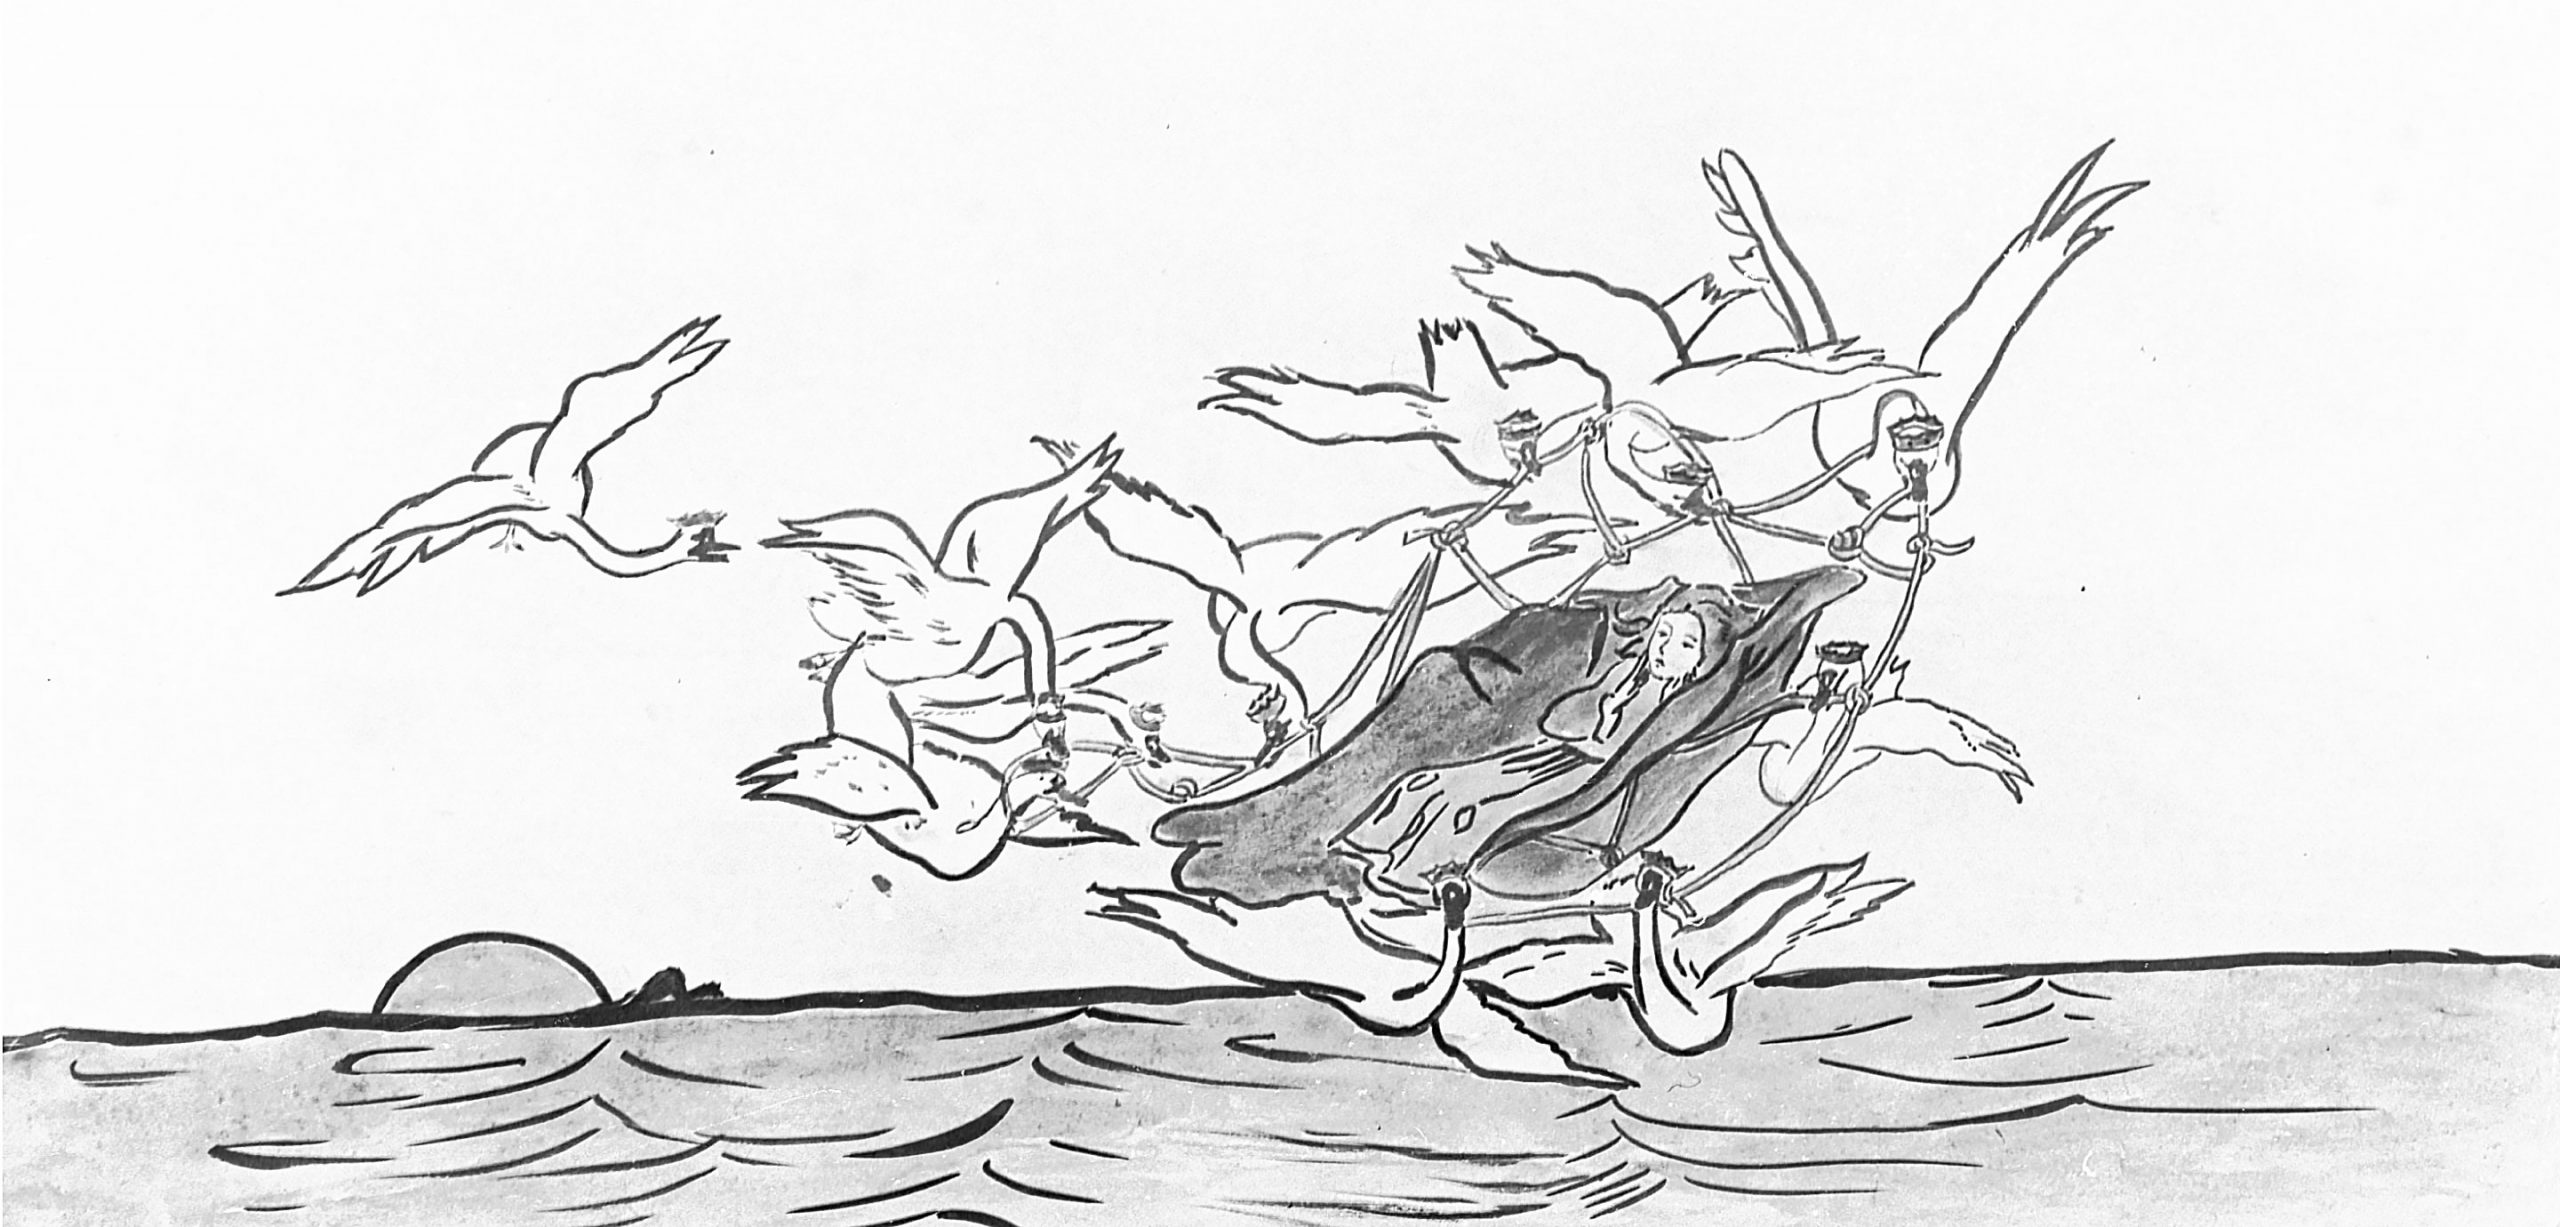 Image of a woman being carried through the air by swans.